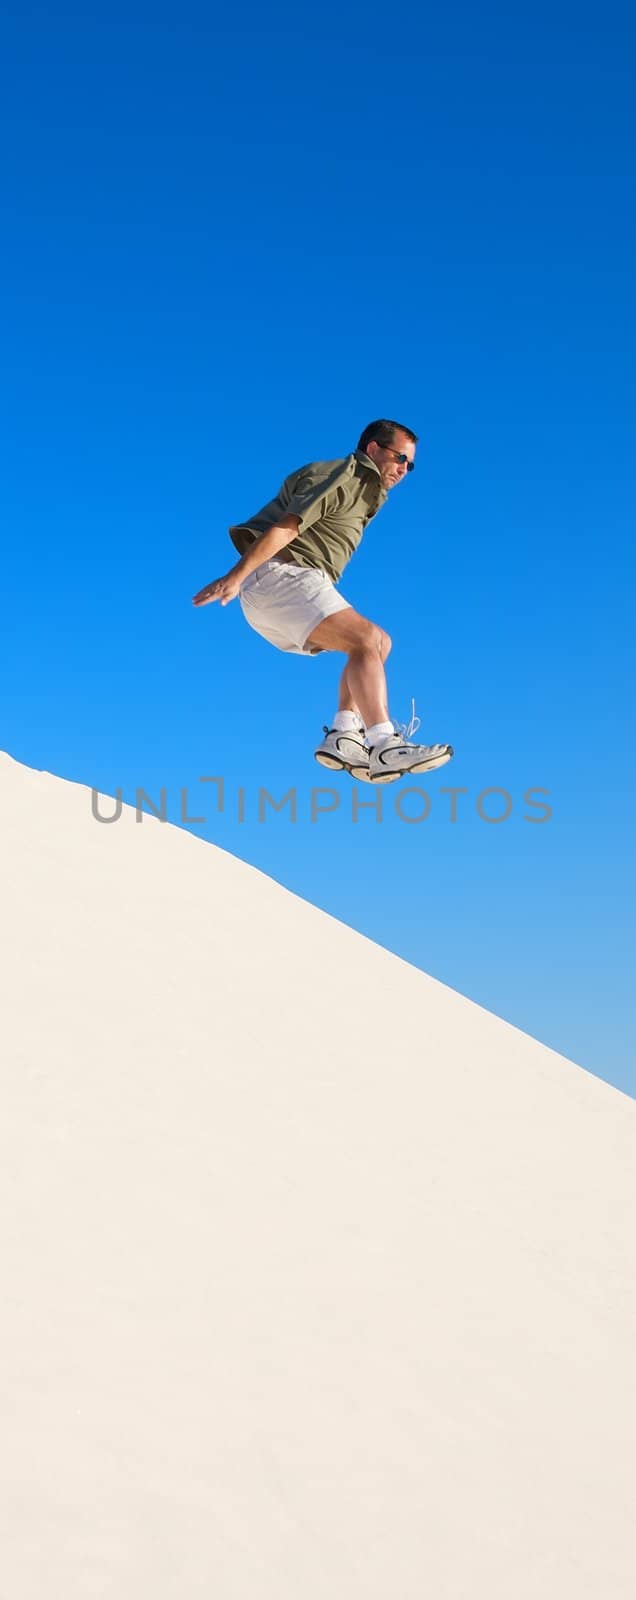 An image of a man jumping off of sand dunes